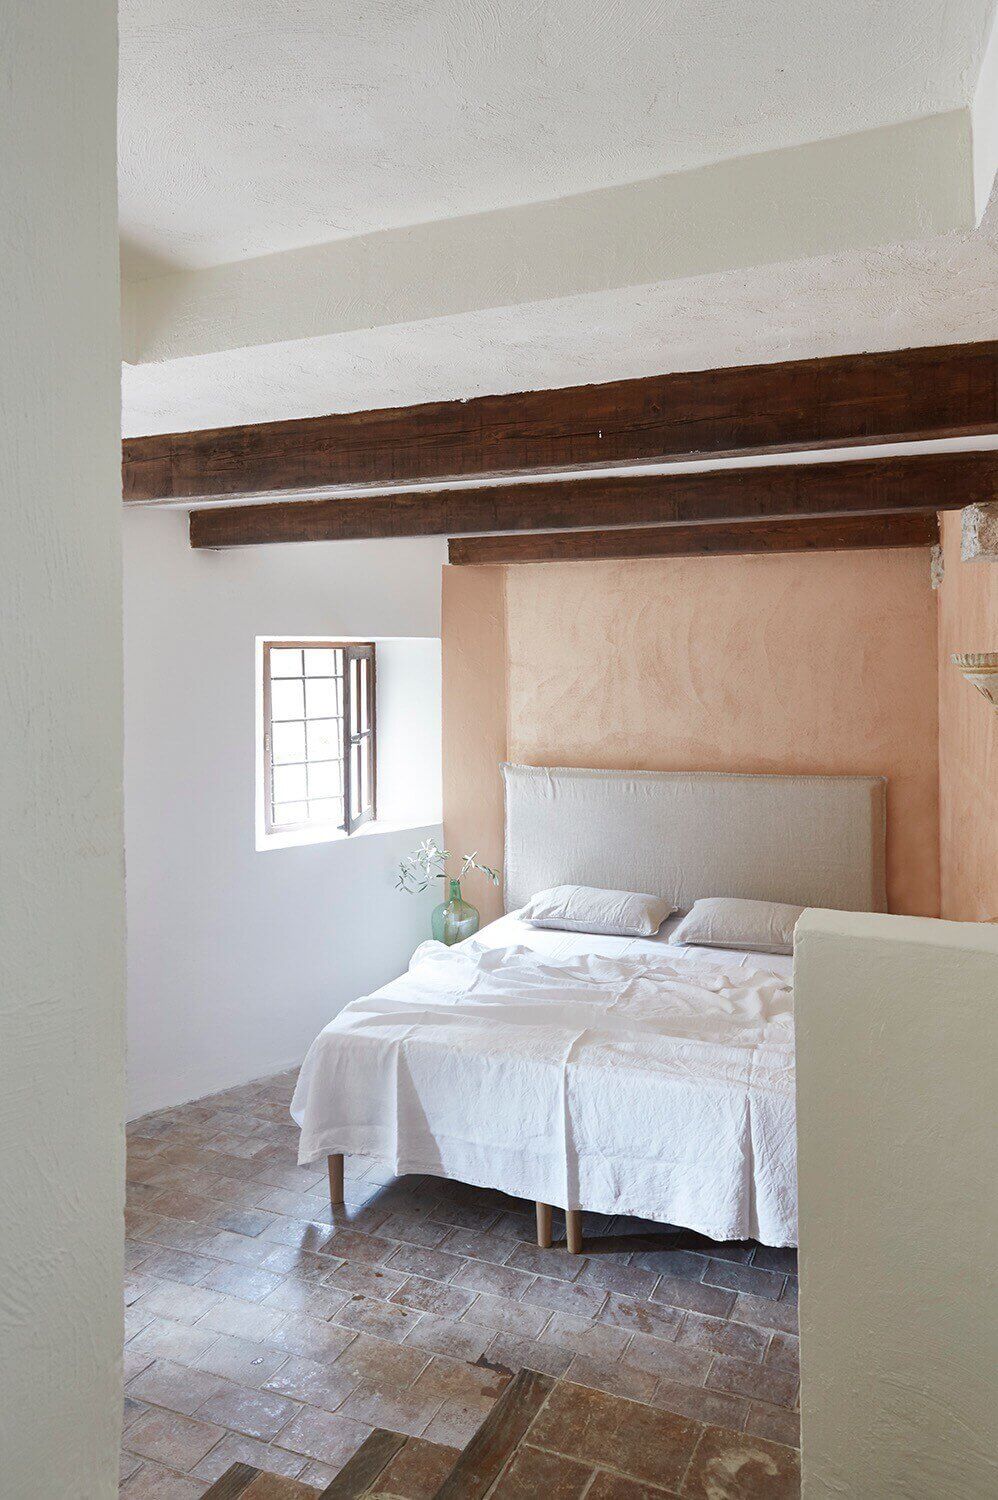 12th century provence airbnb apartment nordroom13 A Stunning Provence Airbnb in a Poet's 12th-Century Apartment